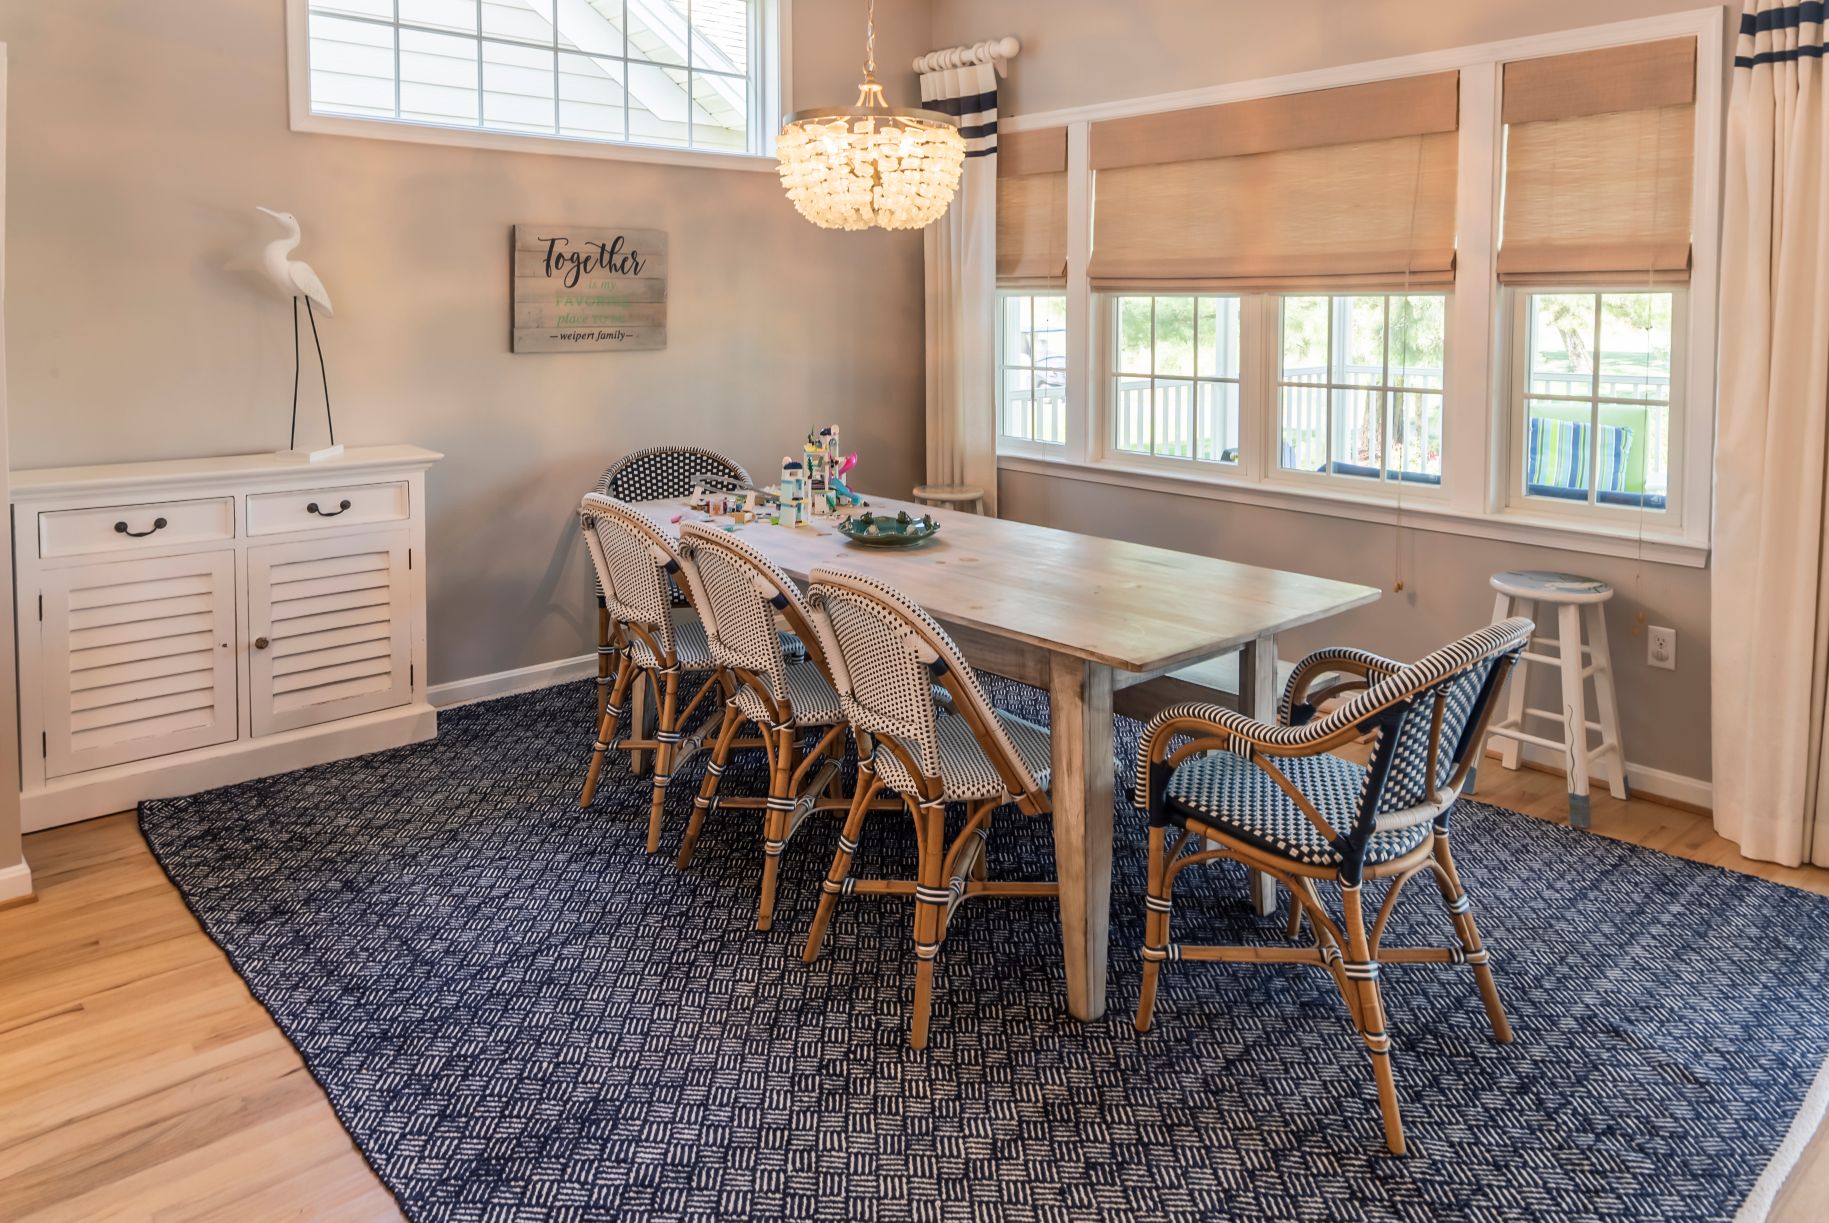 Kitchen Remodel in Willow Oak, Ocean View DE with Window-side Vintage Dining Table with Five Chairs